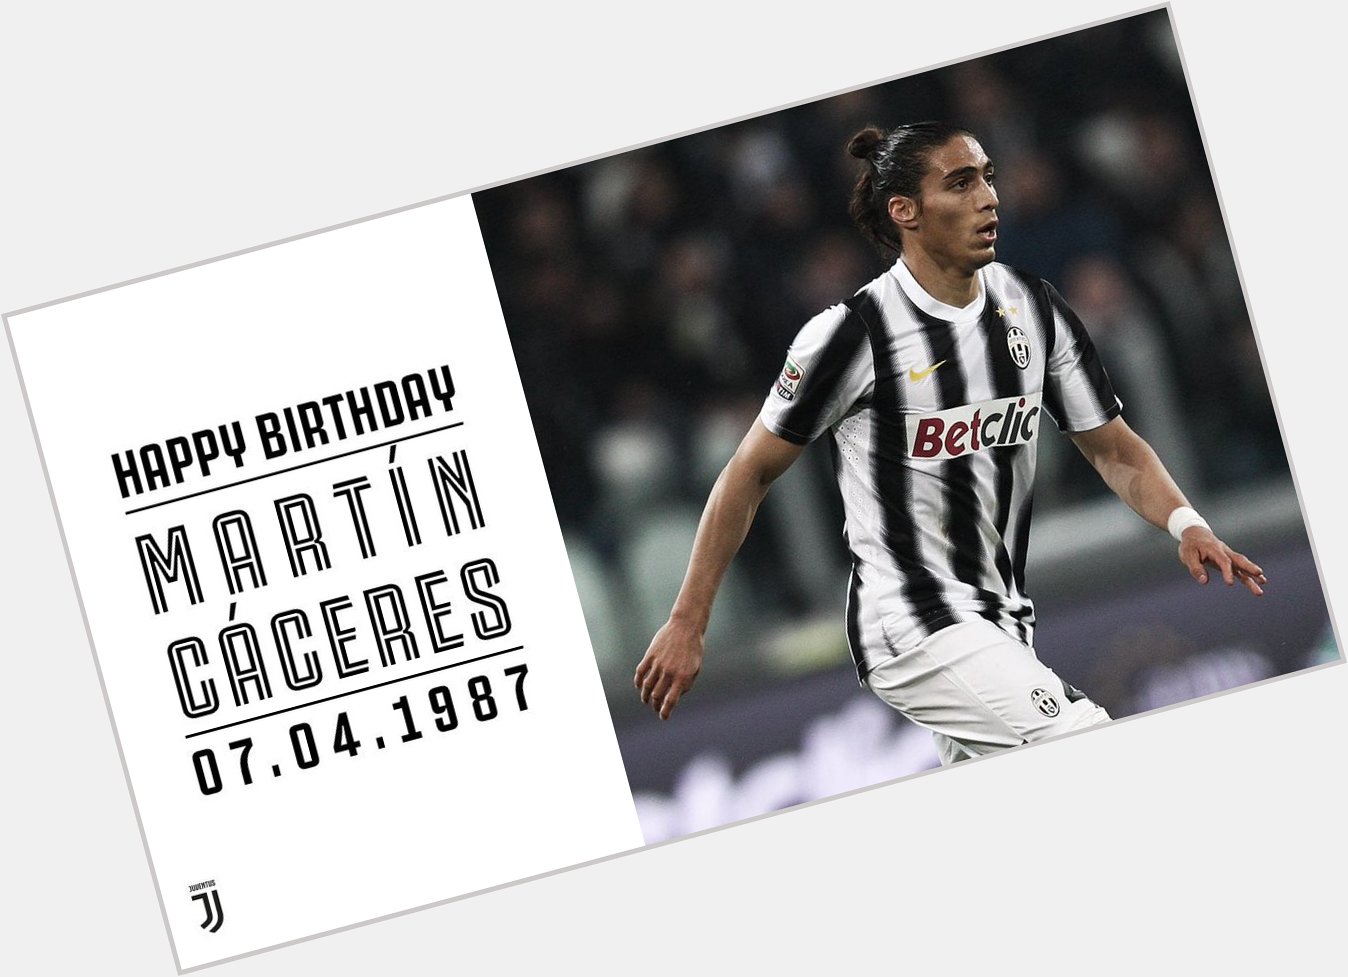 A -time winner with the Bianconeri, happy birthday to Martin Caceres  ! 